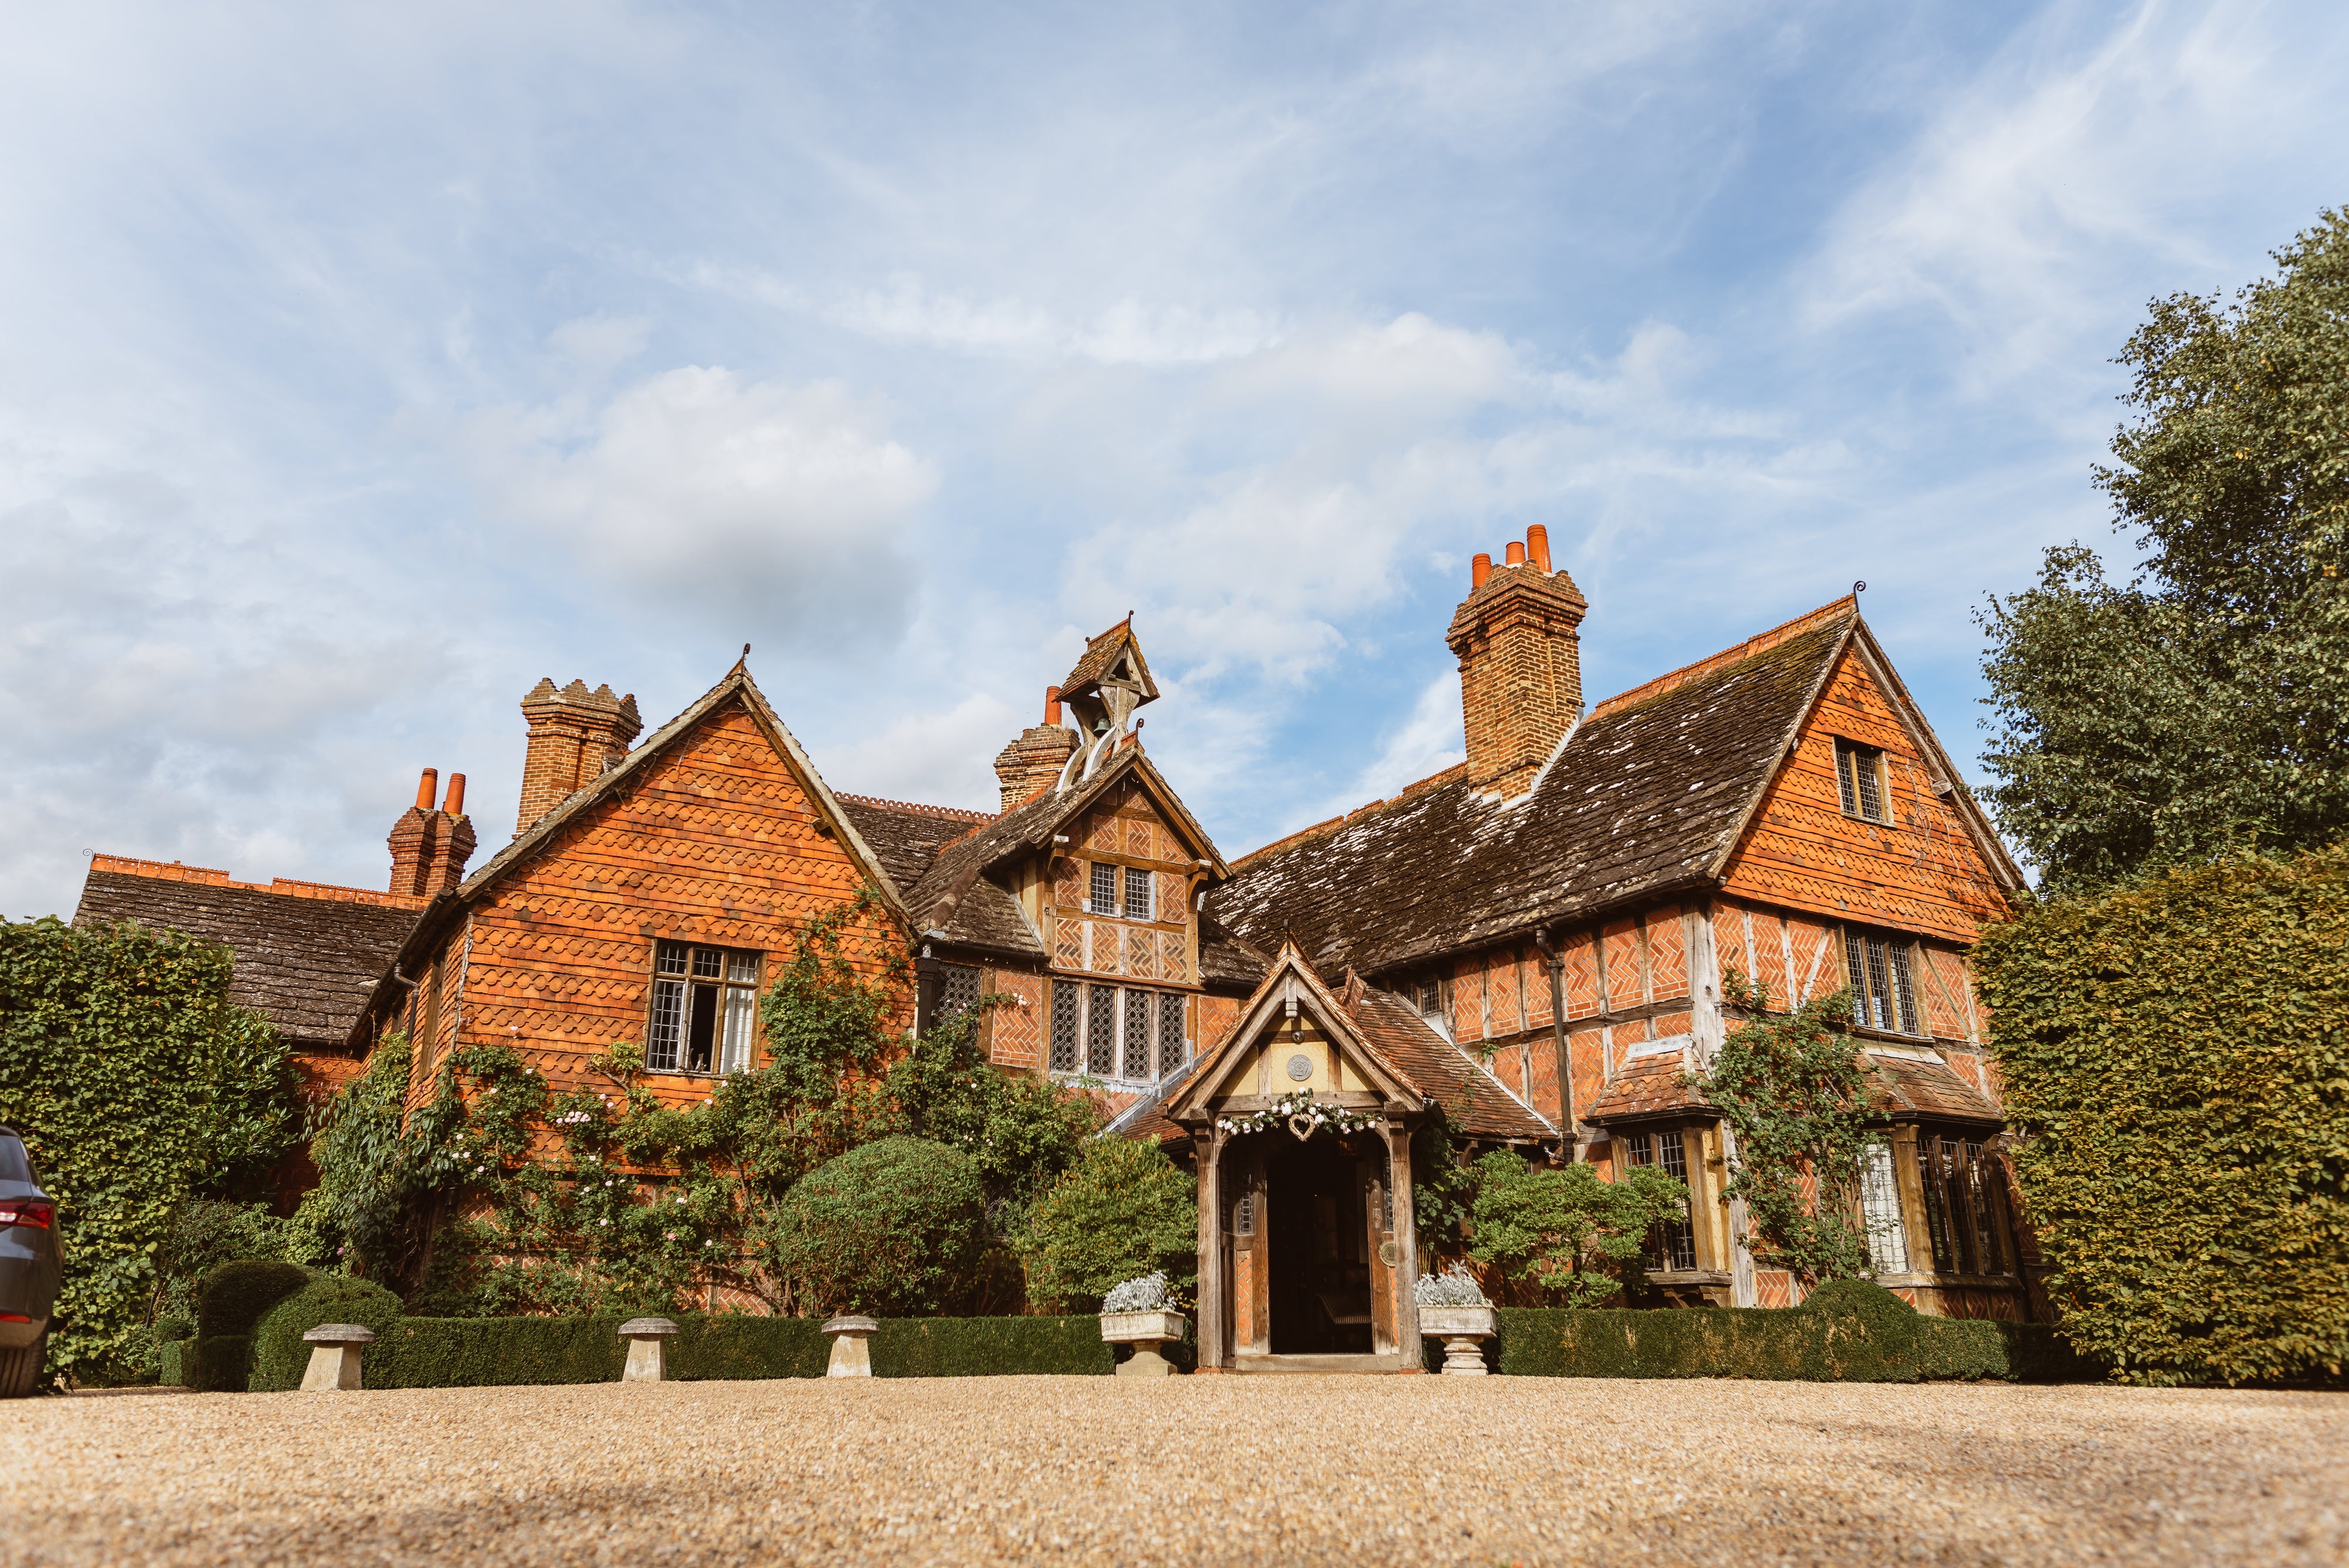 Cosy up by the fireplace in this Tudor-style hotel